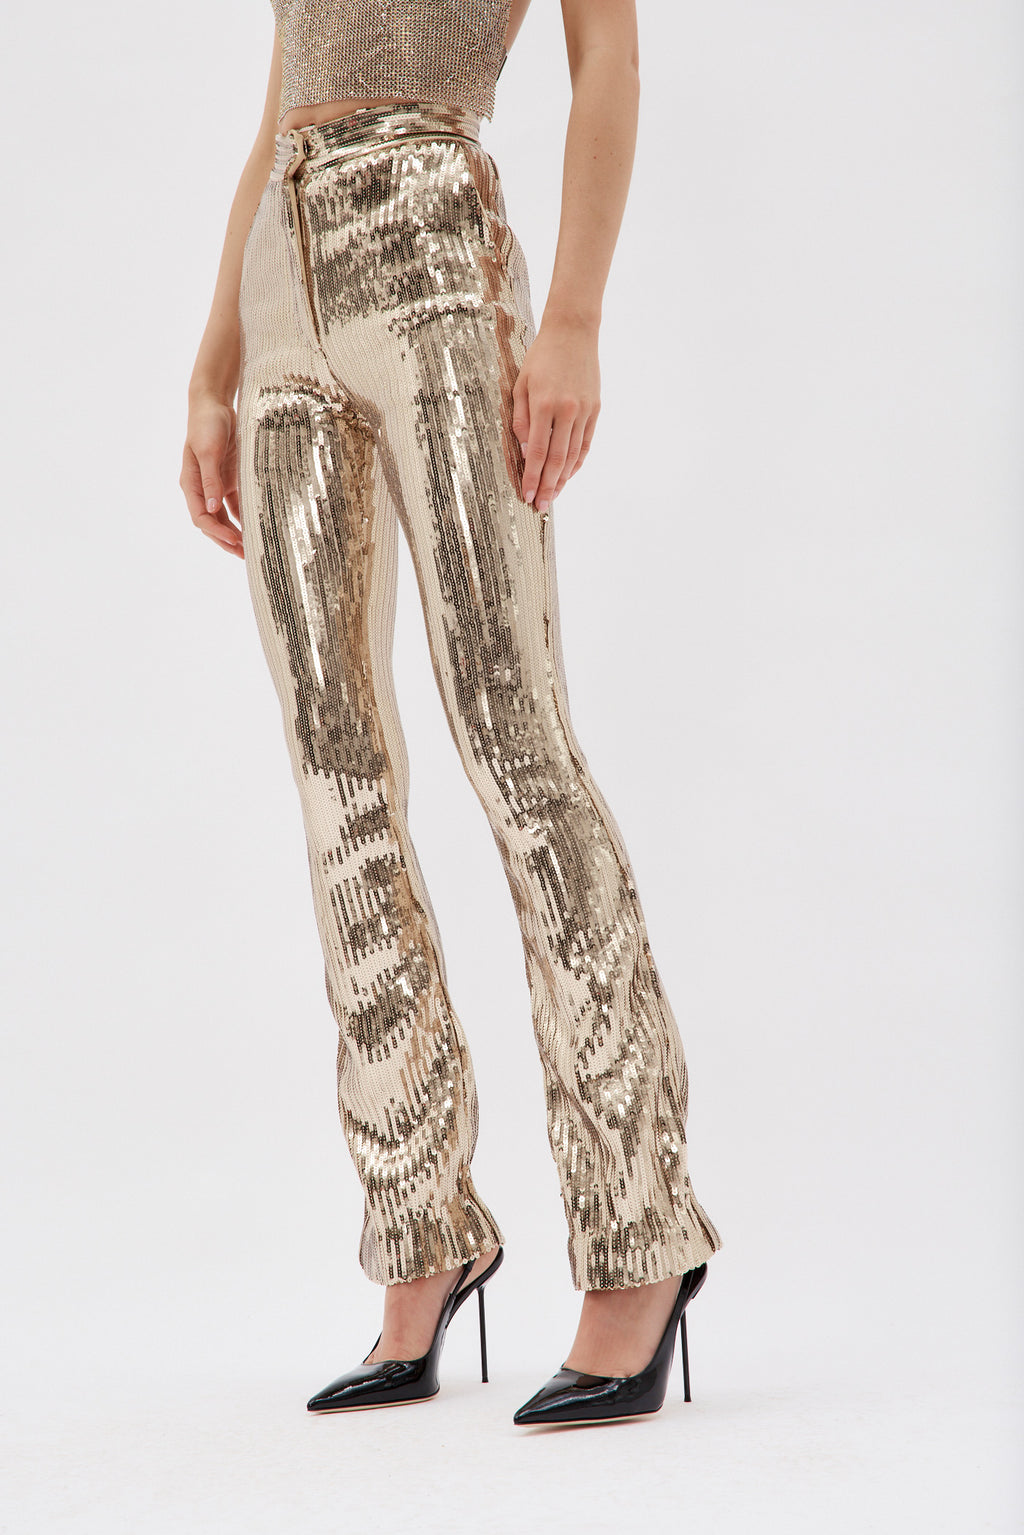 Sequin Trousers Photos and Premium High Res Pictures  Getty Images